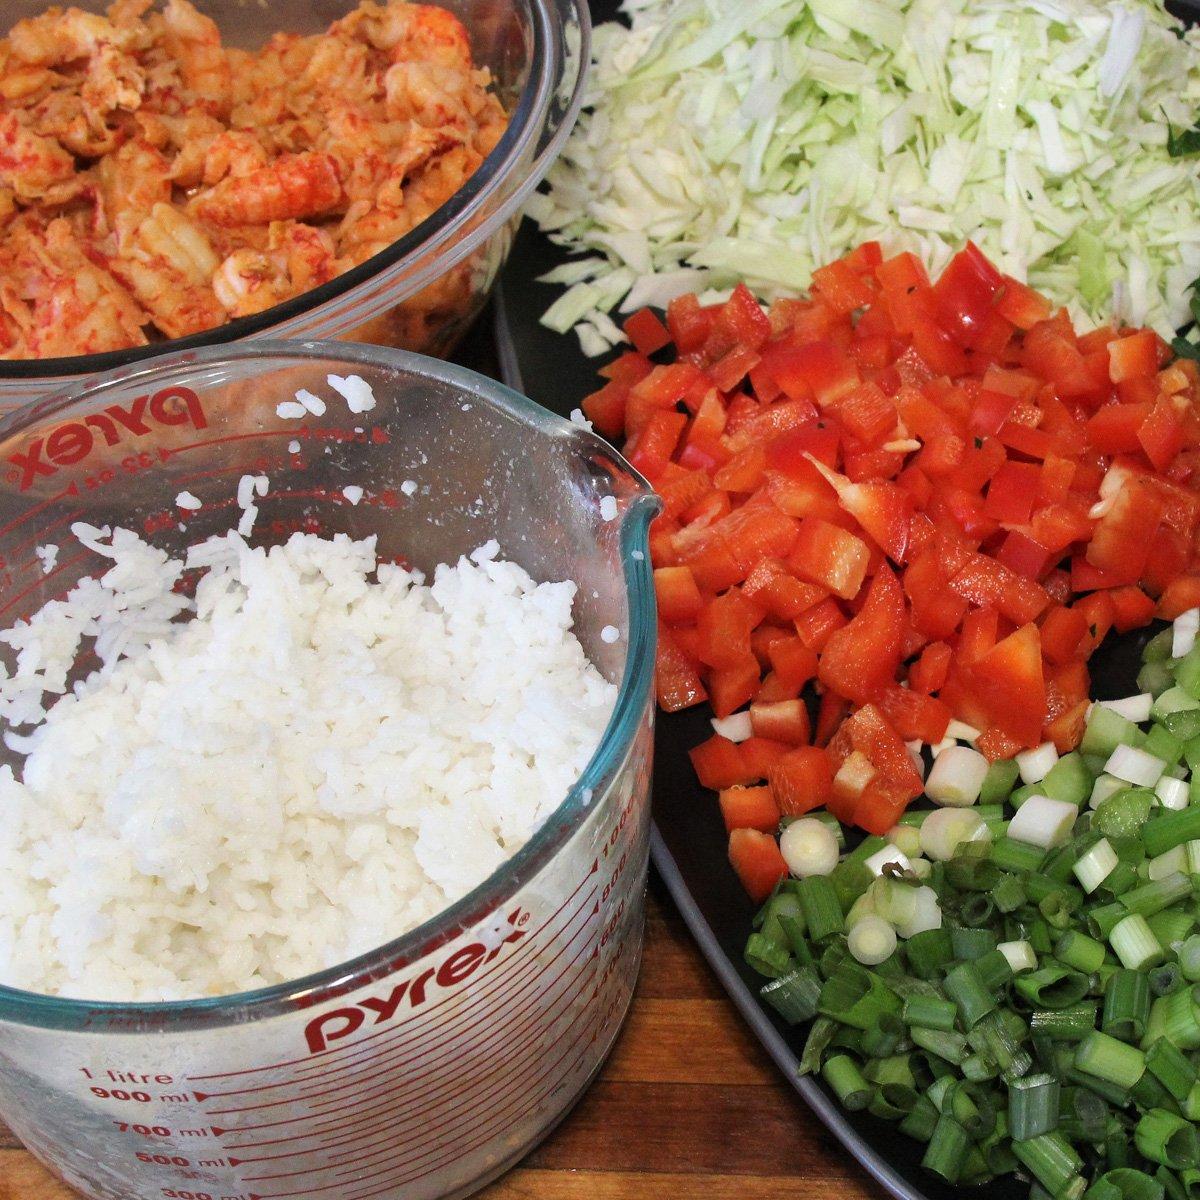 Prep all ingredients before you start cooking.